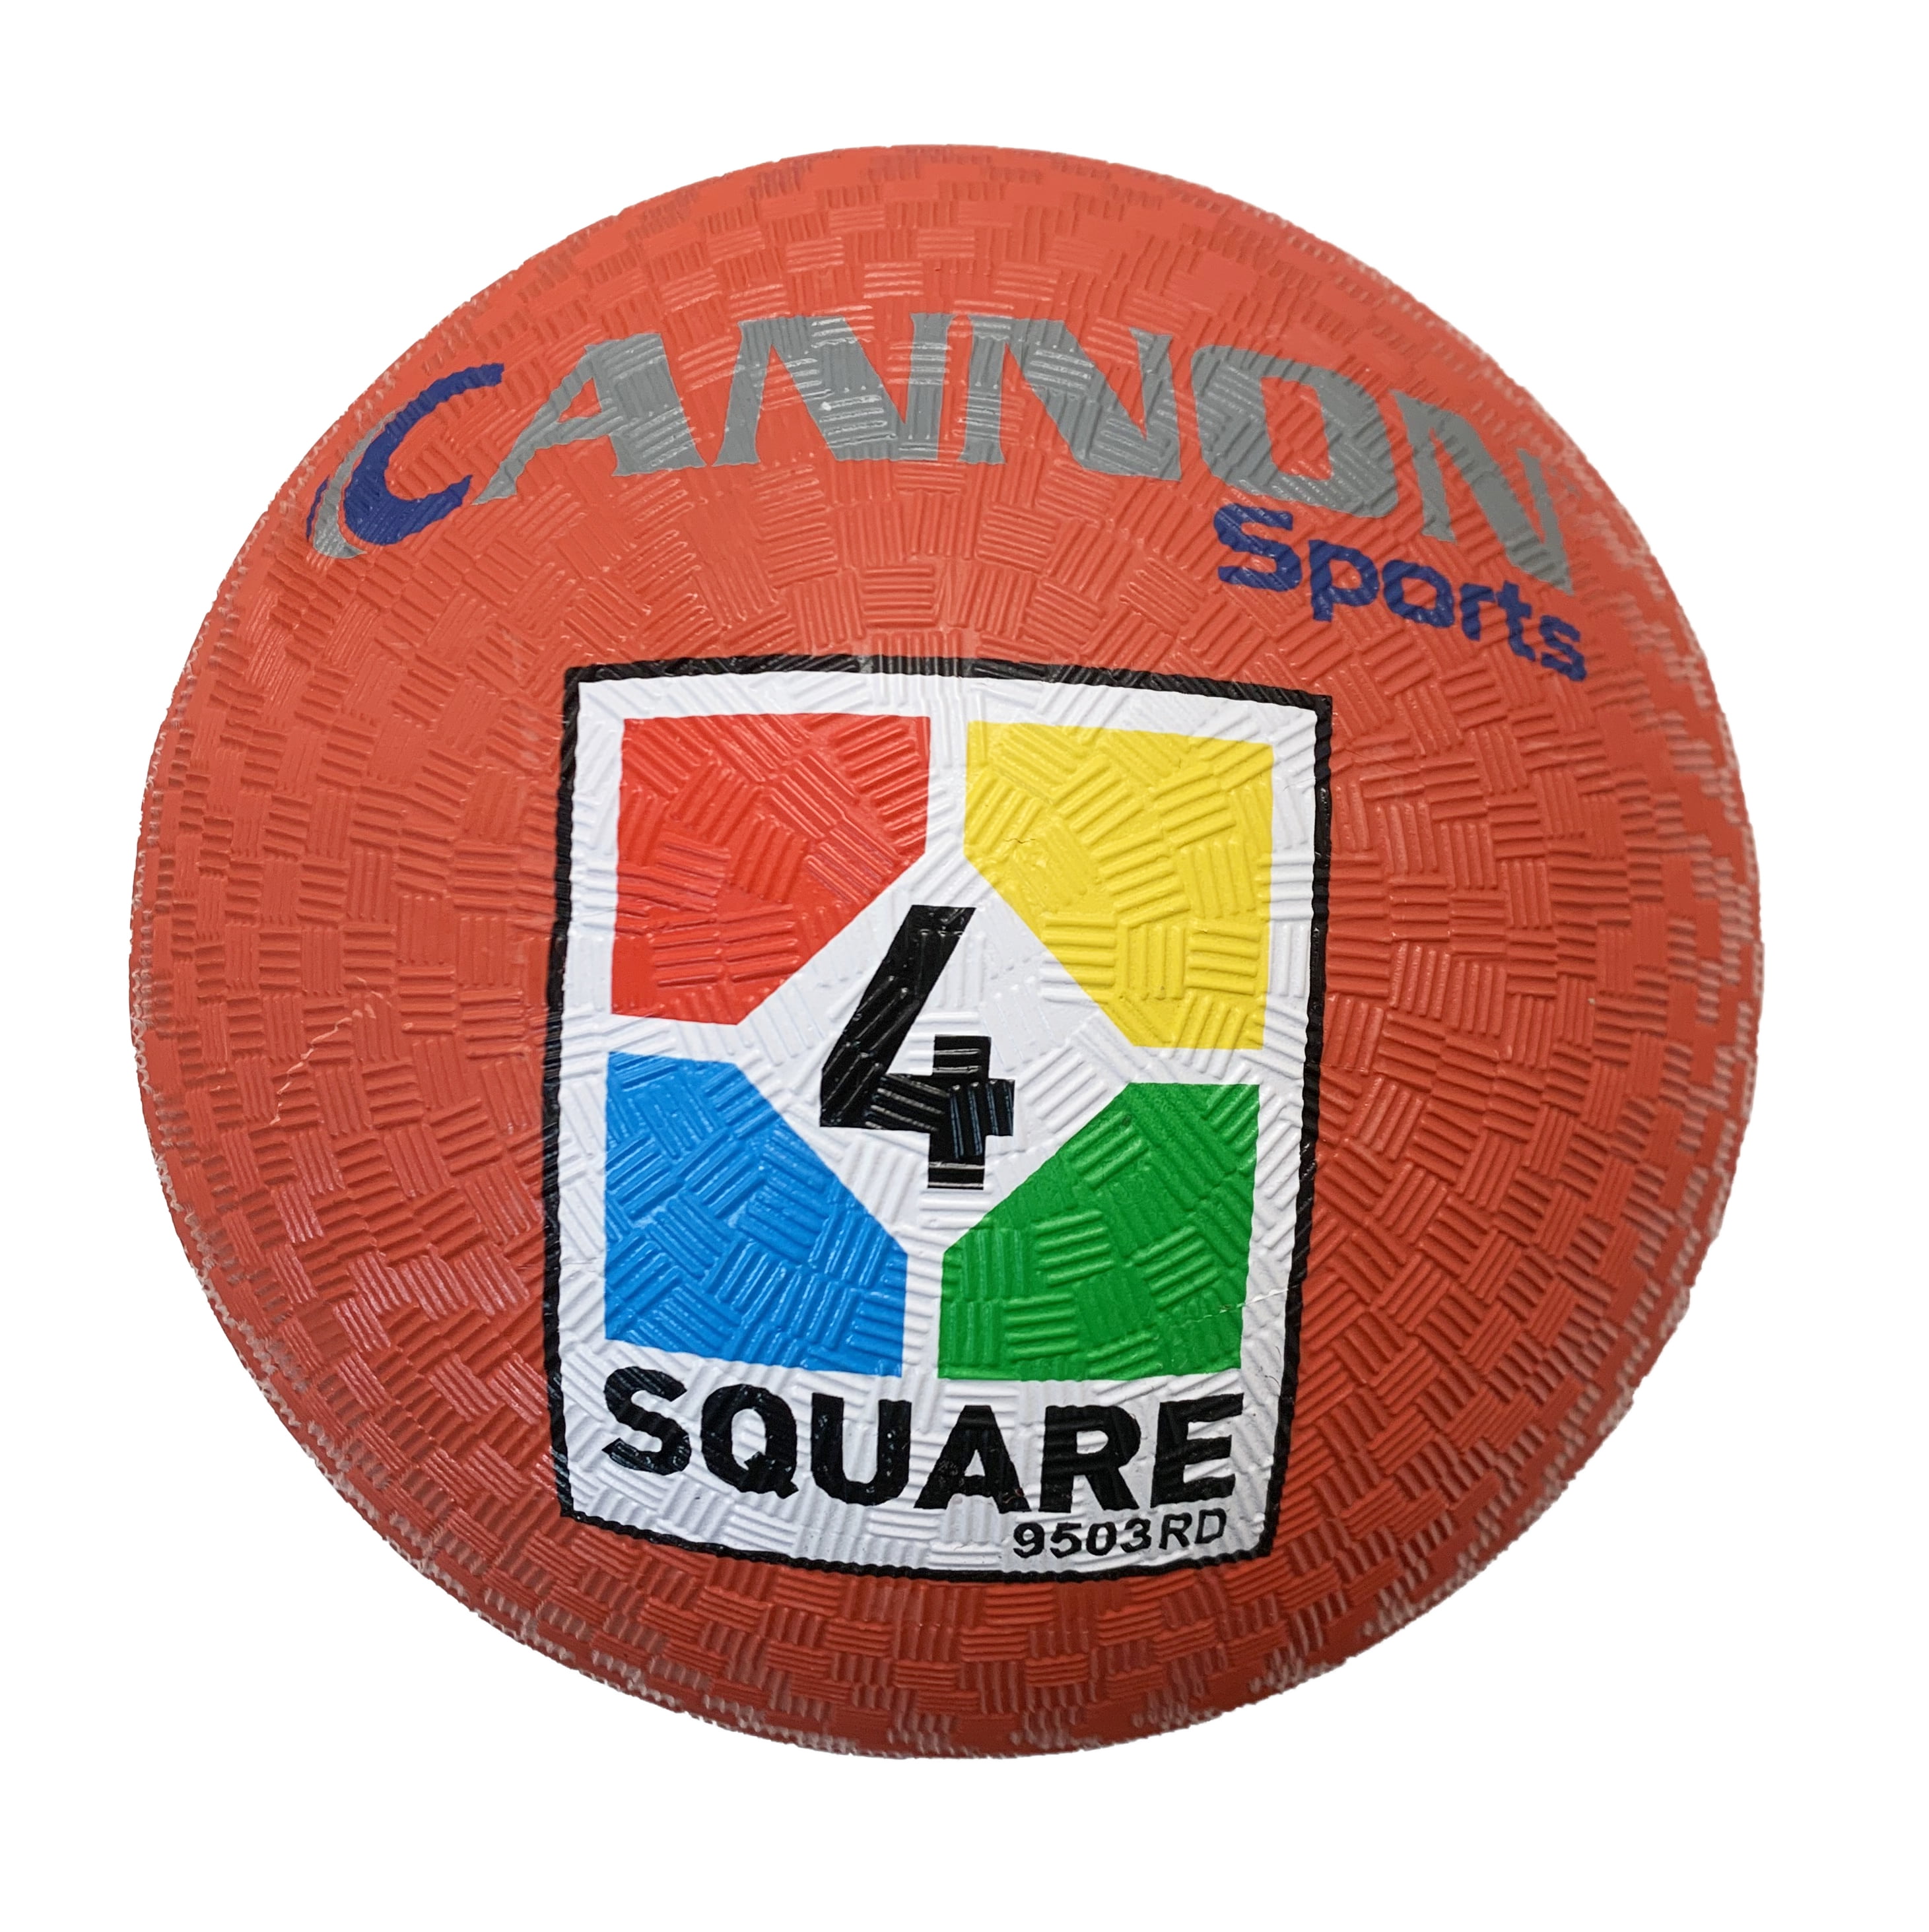 File:Hand ball 4 square.svg - Wikimedia Commons